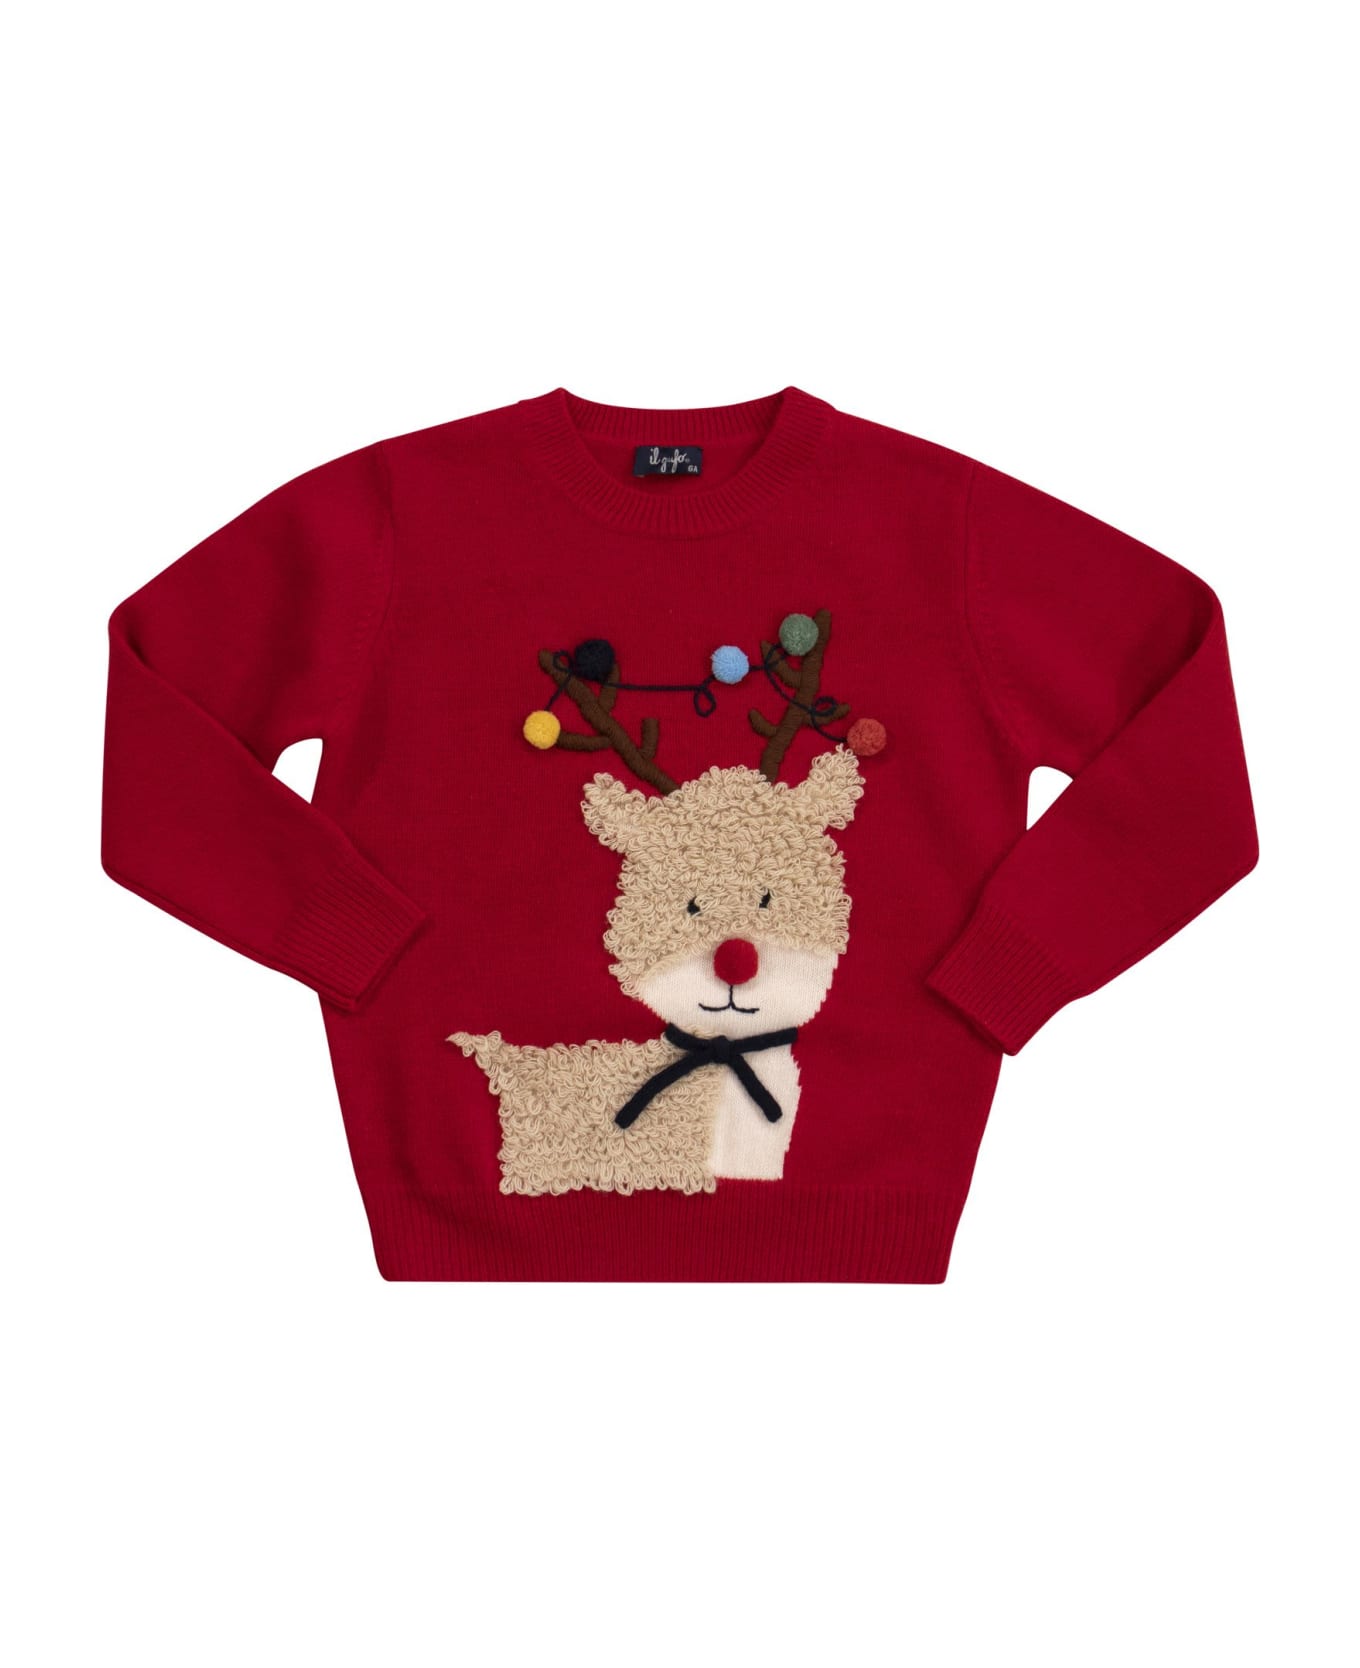 Il Gufo Christmas Jumper With Reindeer And Pom Poms - Red